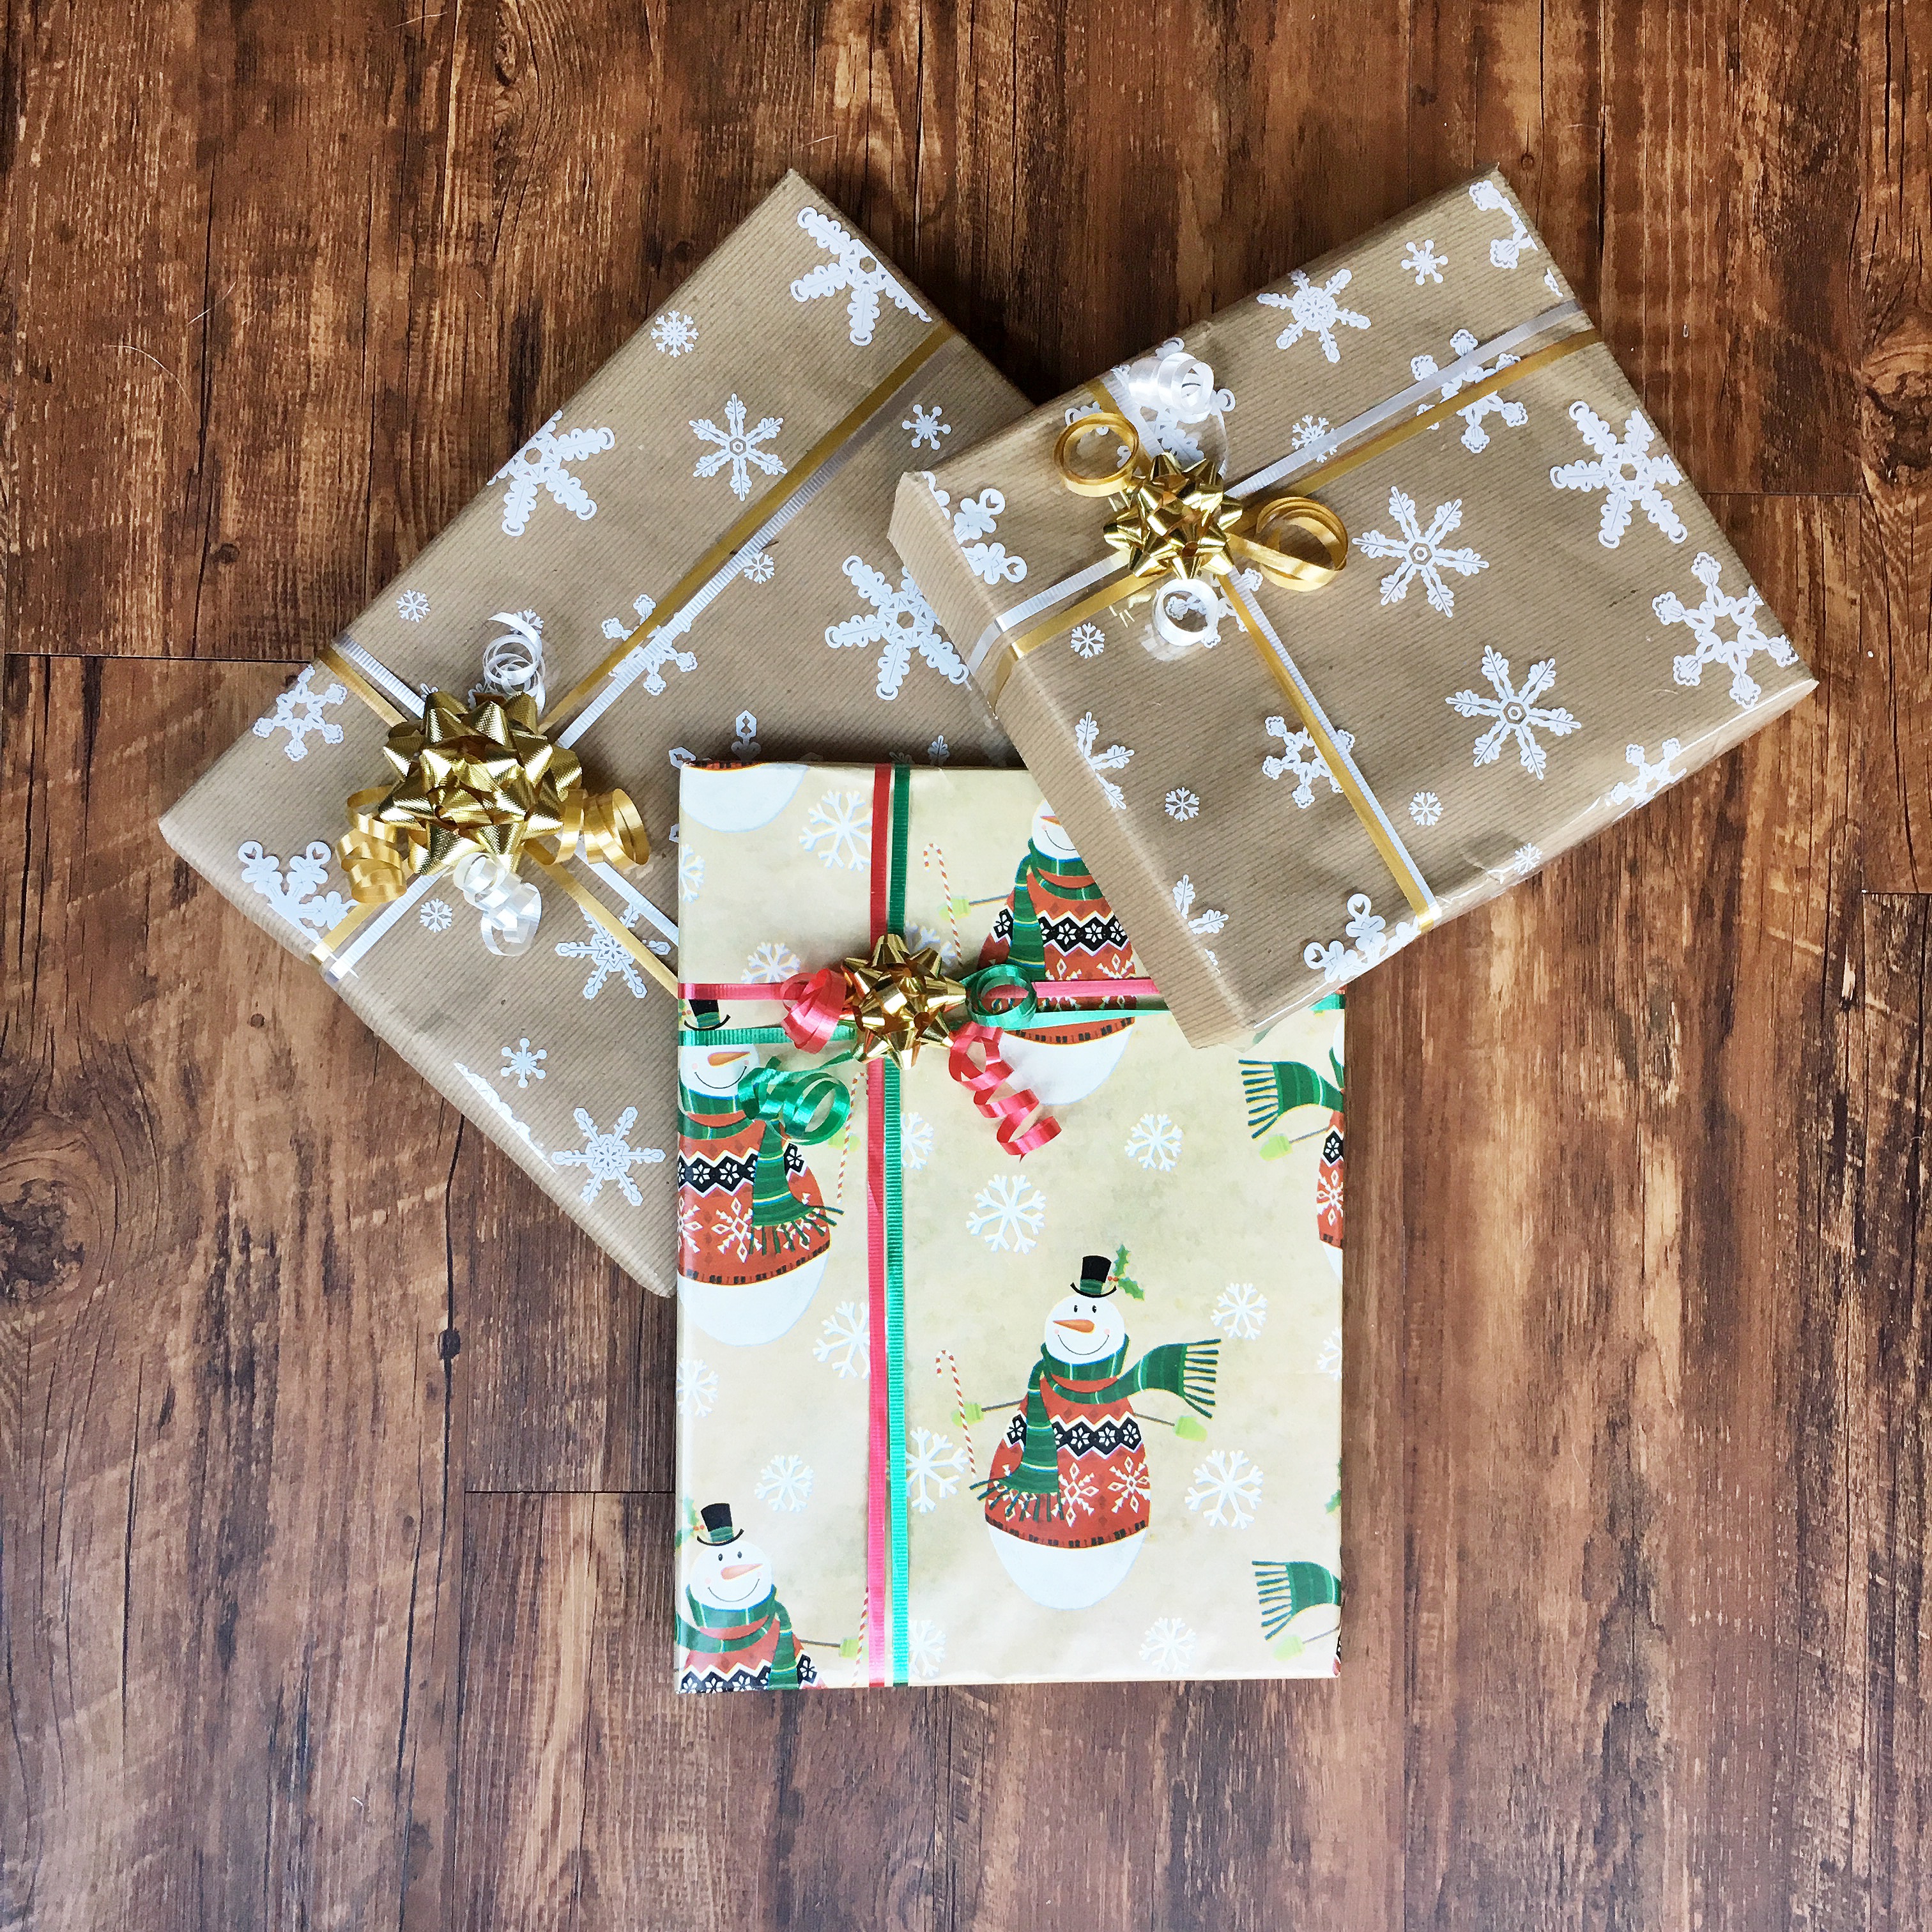 Unique Christmas Gift Ideas for Clutter-Free Joy